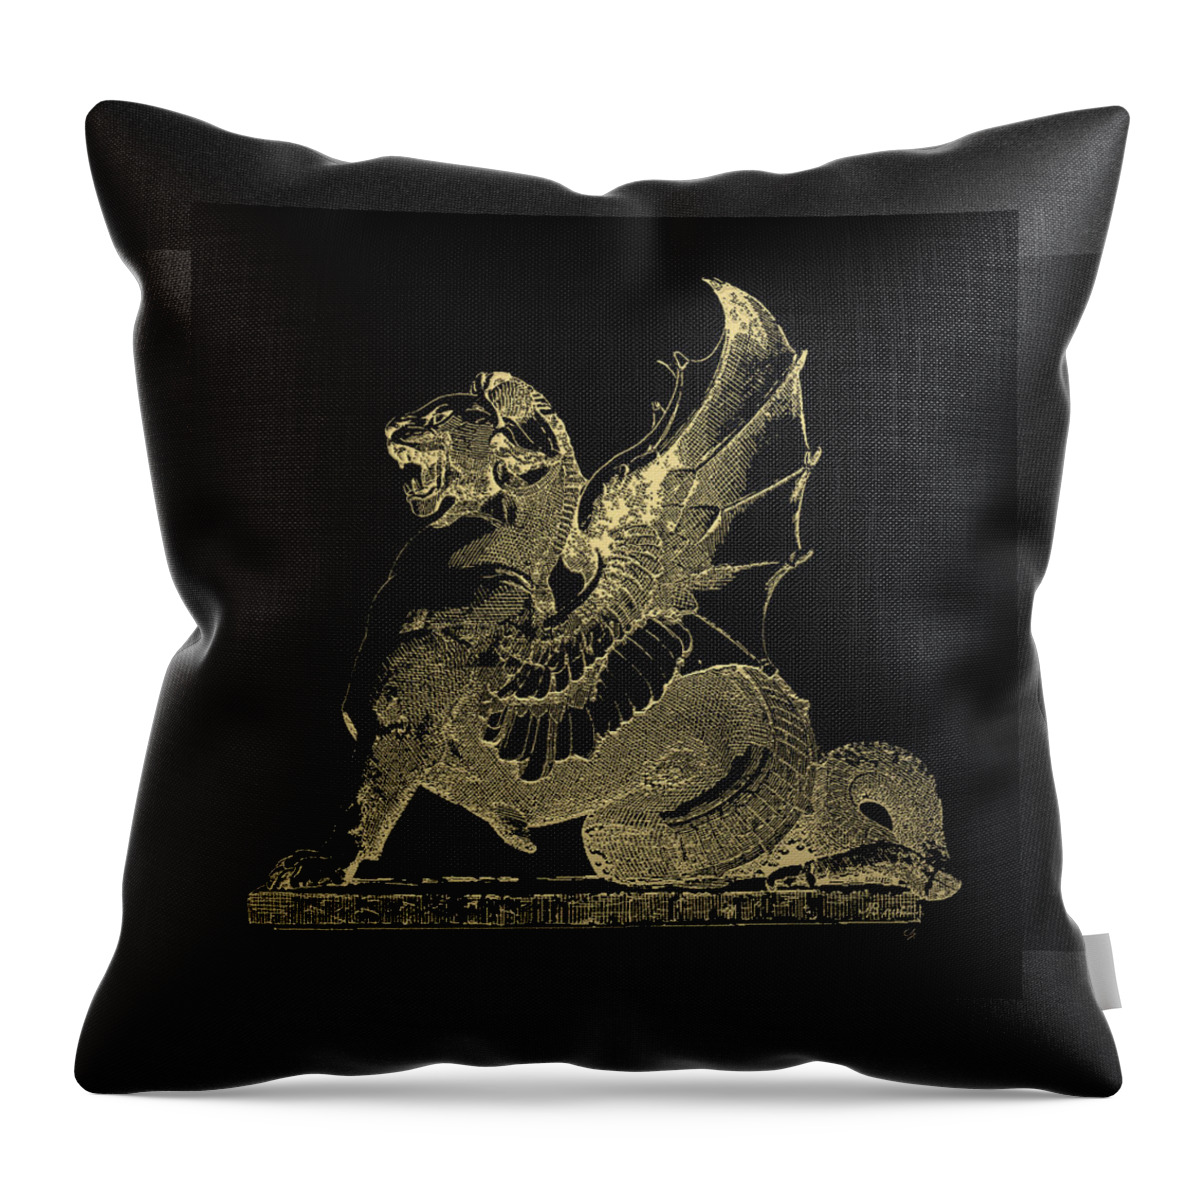 'antique-vintage-retro' Collection By Serge Averbukh Throw Pillow featuring the digital art Winged Dragon Chimera from Fontaine Saint-Michel, Paris in Gold on Black by Serge Averbukh